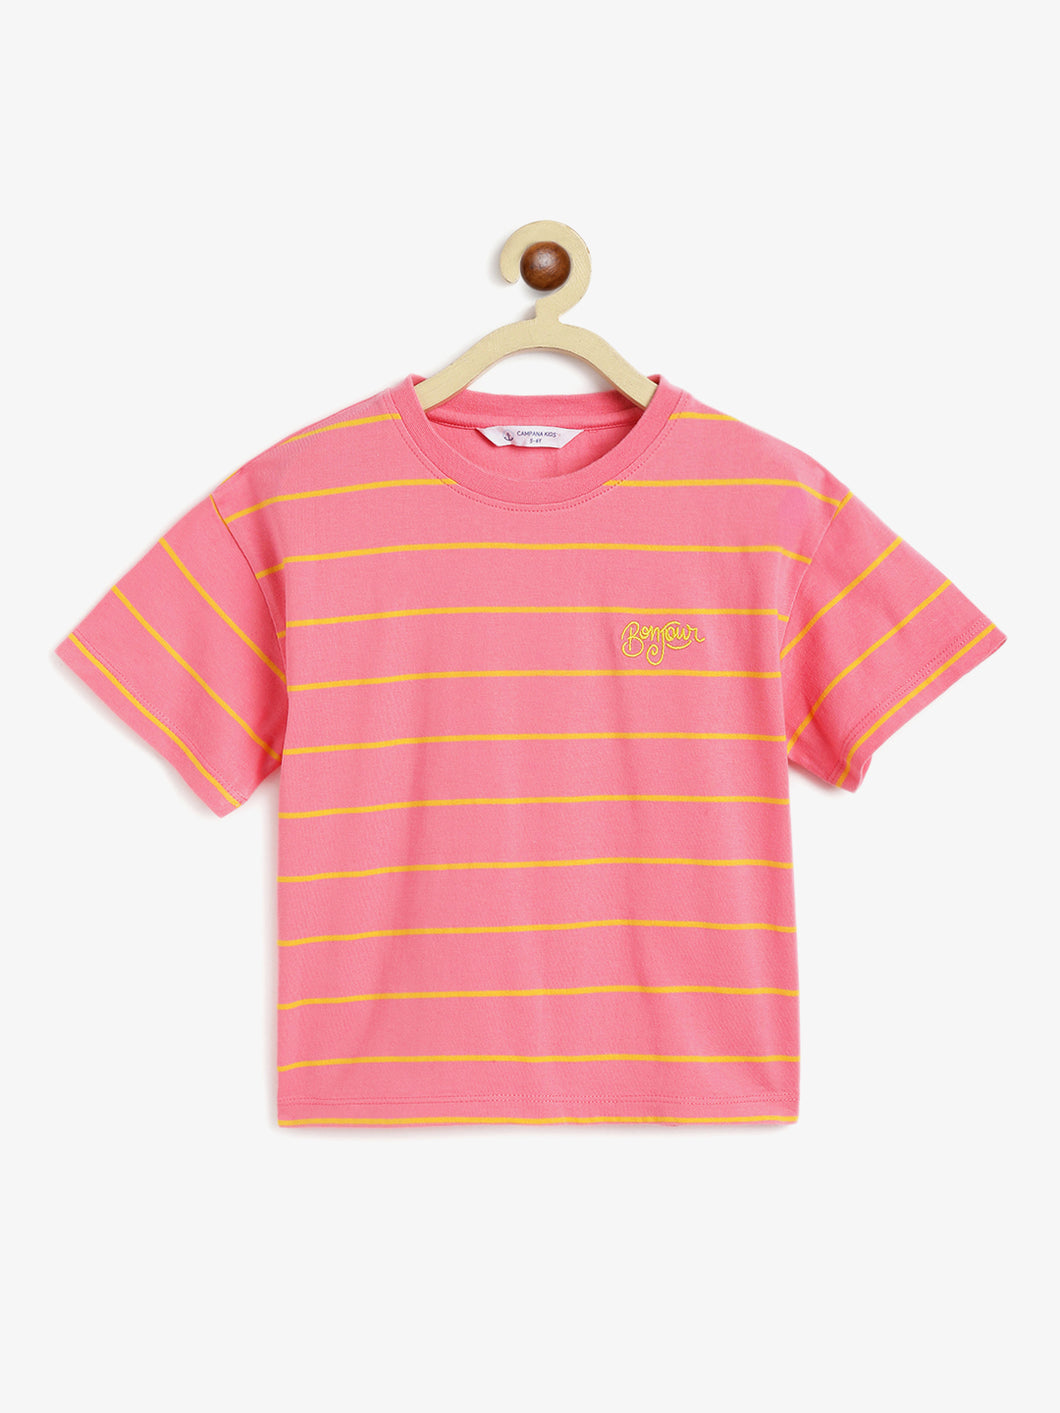 Campana Girls Alexis Half Sleeves Striped Drop Shoulder T-shirt with Embroidery - Pink & Yellow